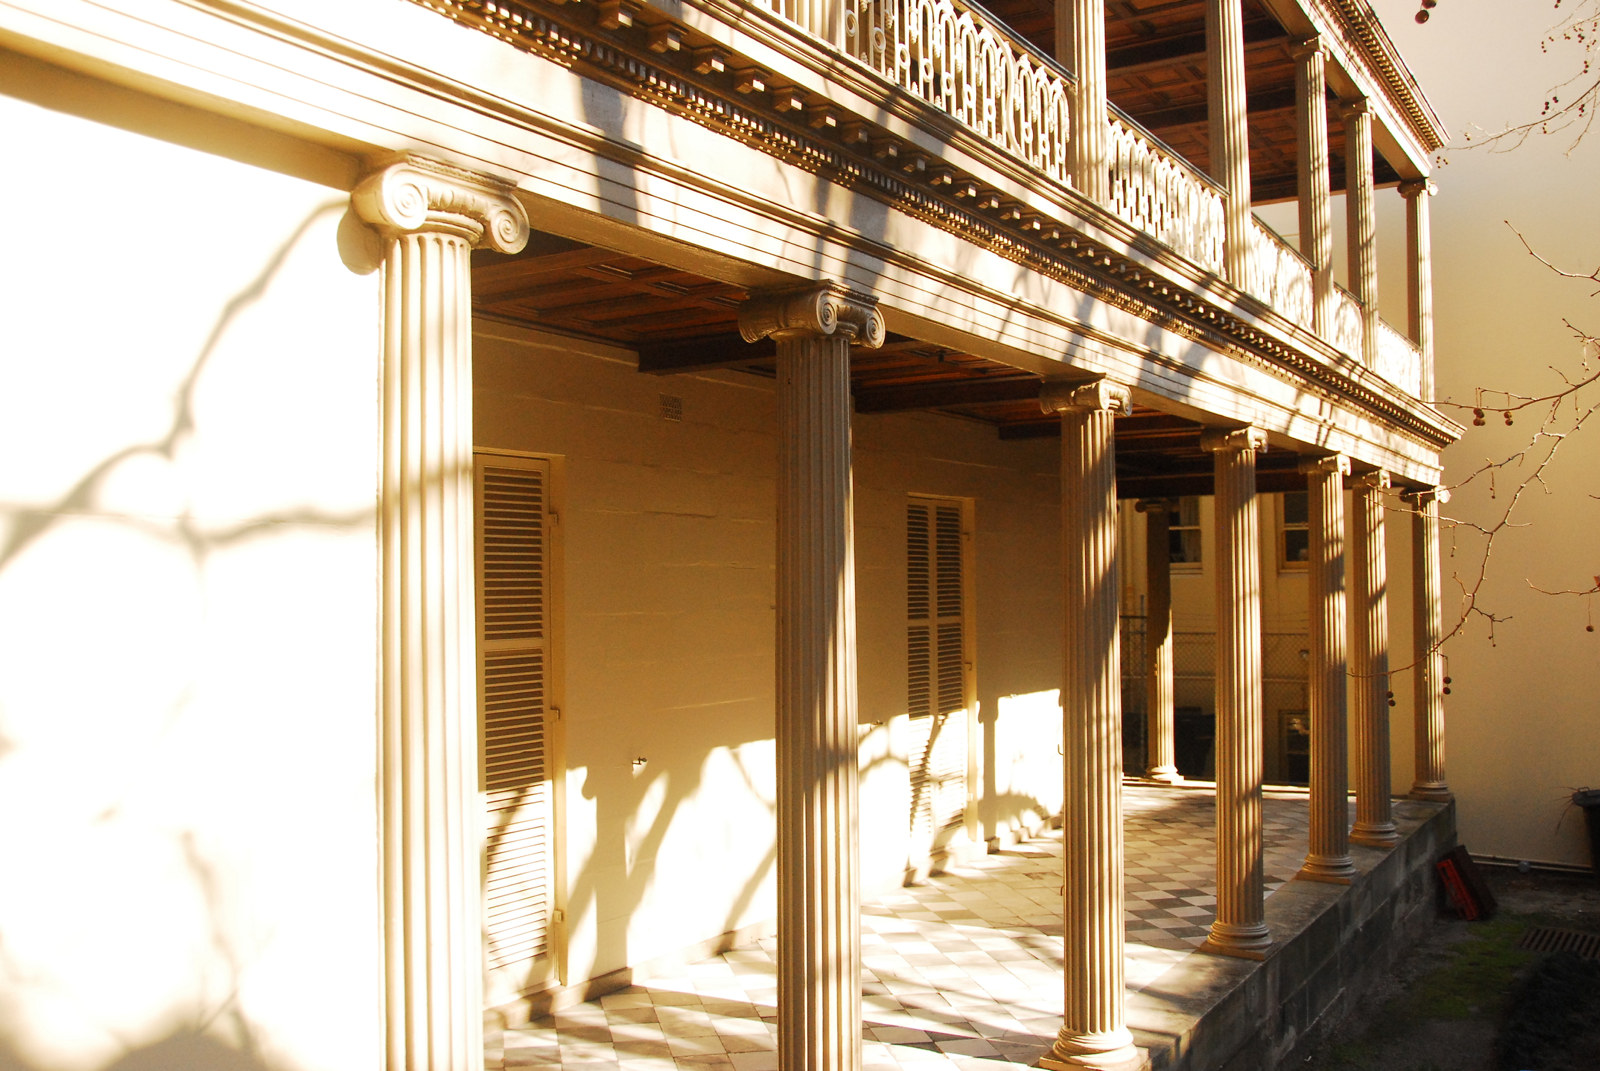 View of sunlit verandah and supporting columns.